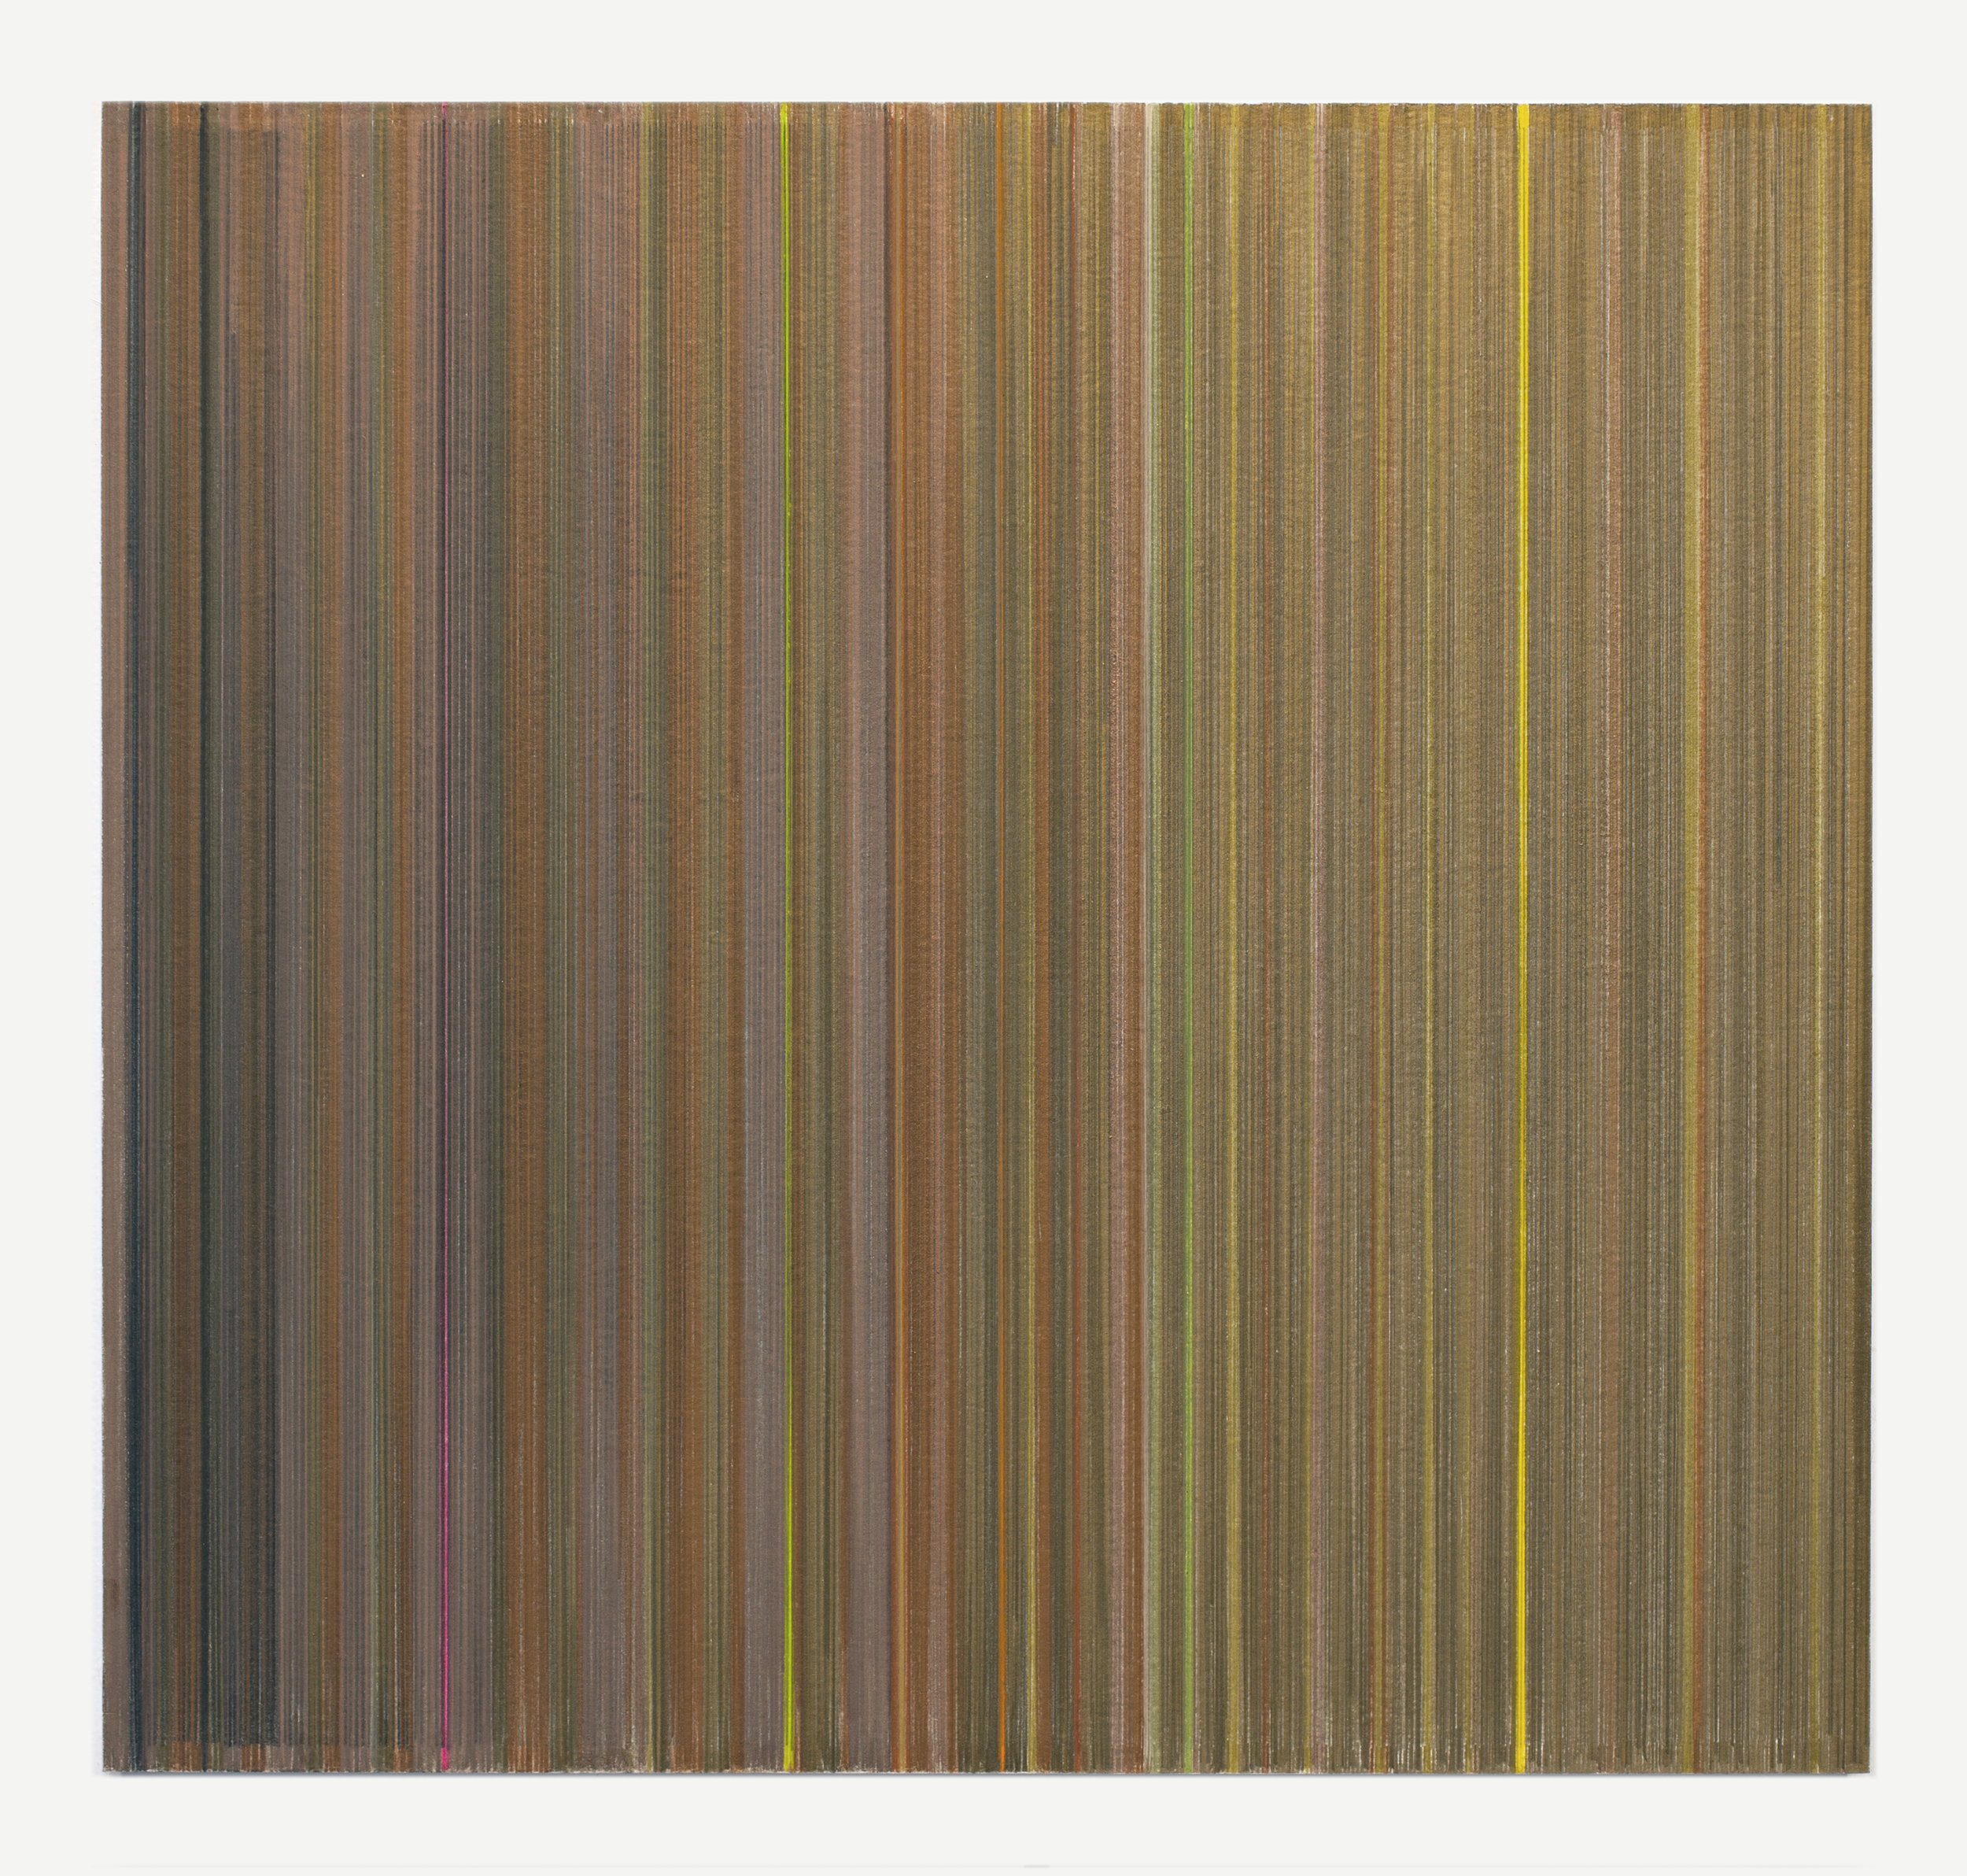    looking down   2017 graphite and colored pencil on mat board 19 x 18 inches title from poem by Alice Oswald  Looking Down  from  Falling Awake , 2016, W.W. Norton &amp; Company   